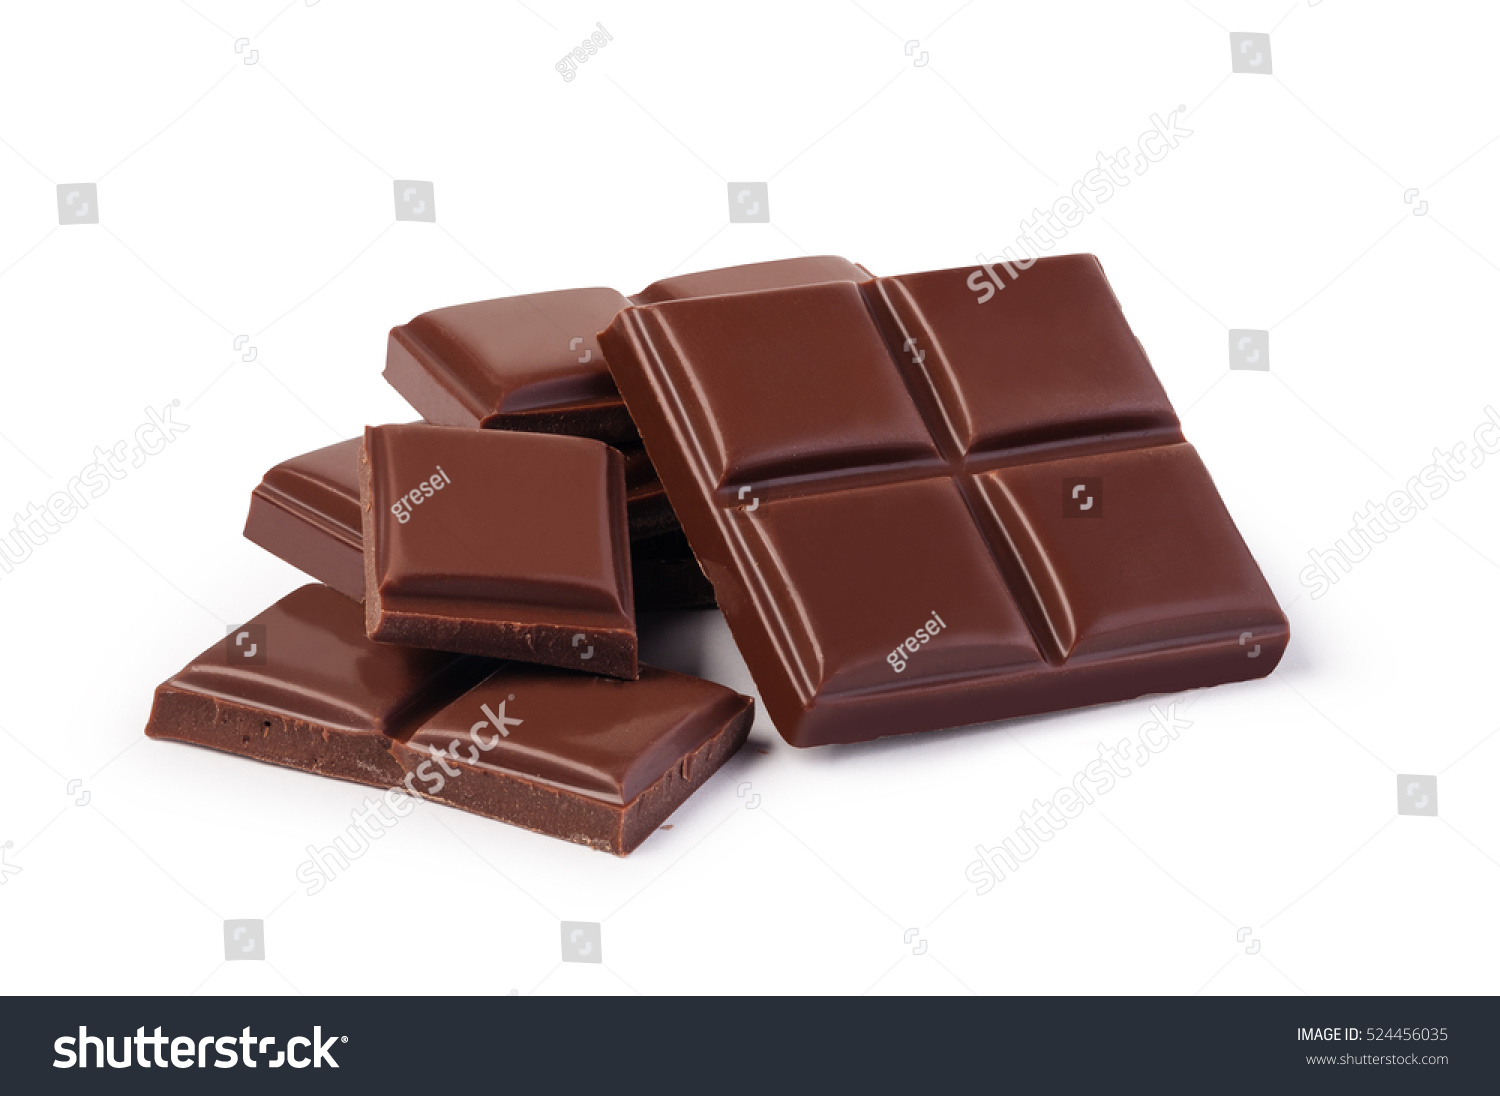 close up a chocolate bar isolated on white background #524456035